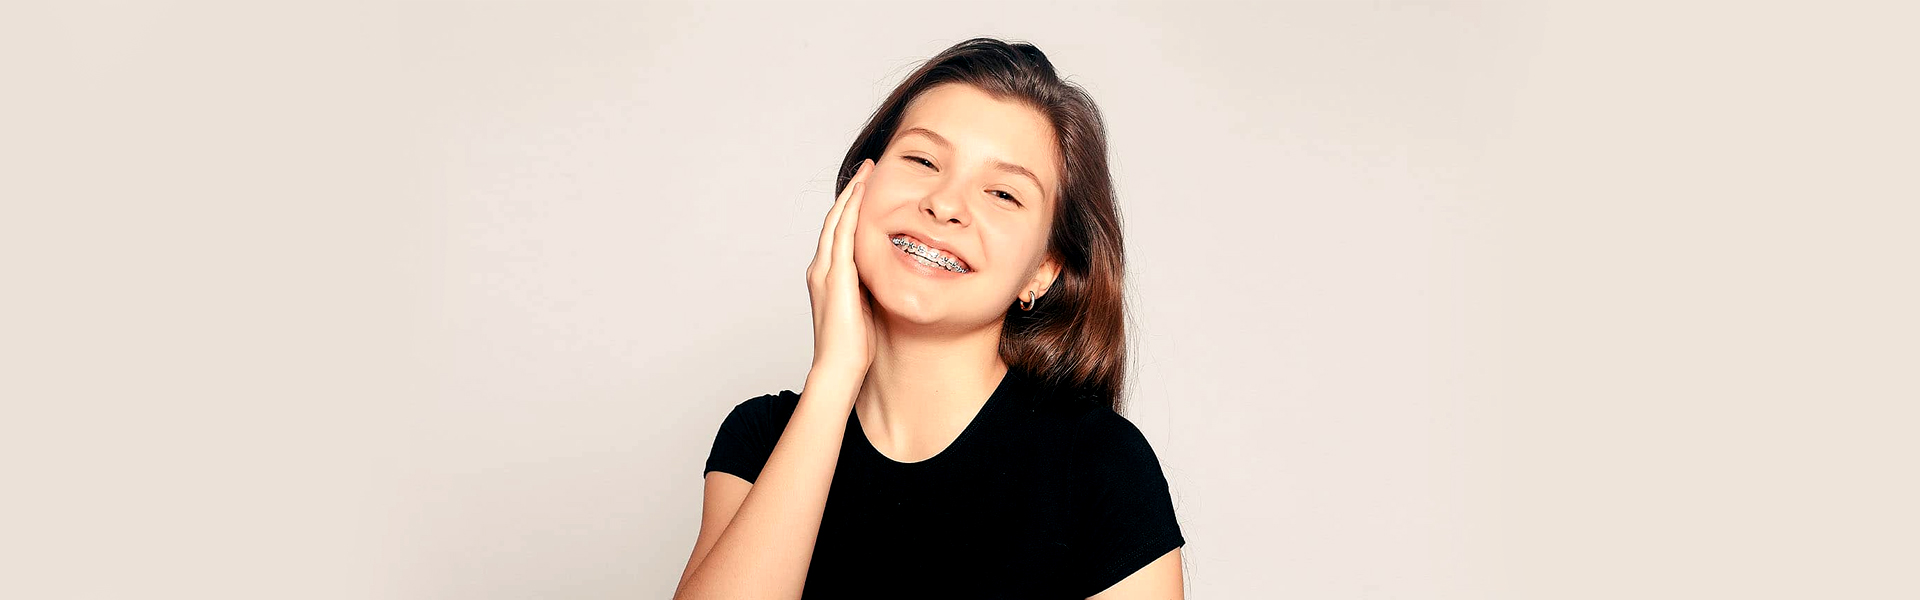 Want to Get Straighter Teeth without Braces? Invisalign Allows You to Do so Discreetly